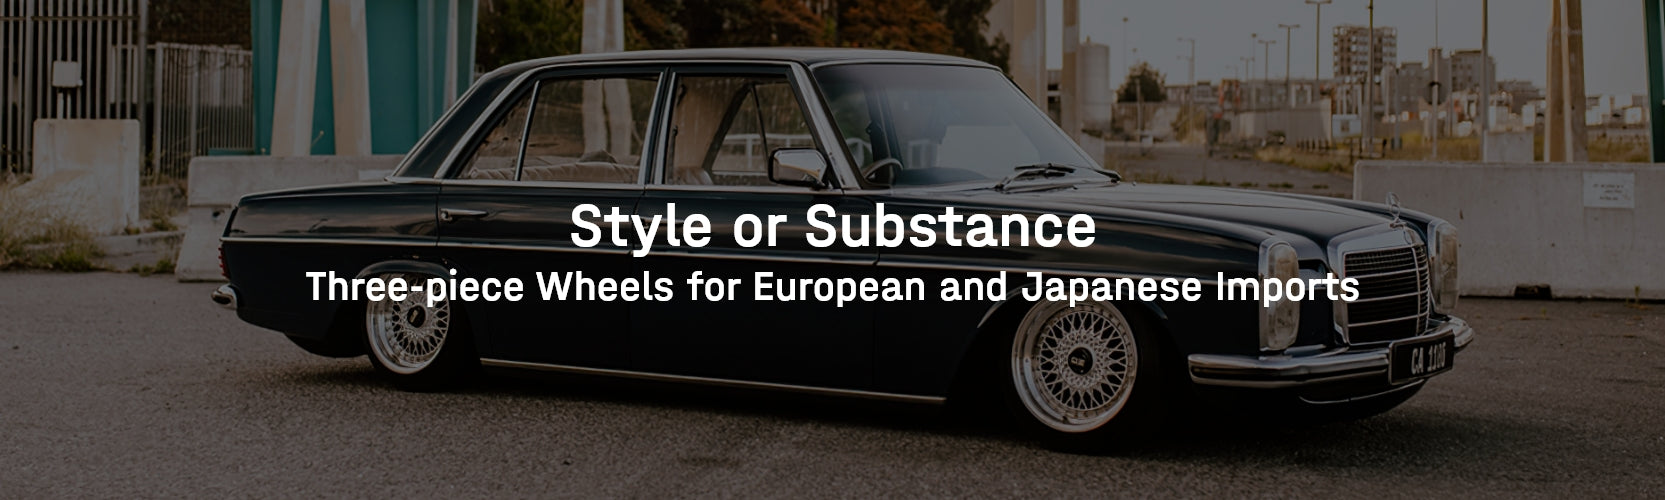 Style or Substance: Three-piece Wheels for European and Japanese Imports